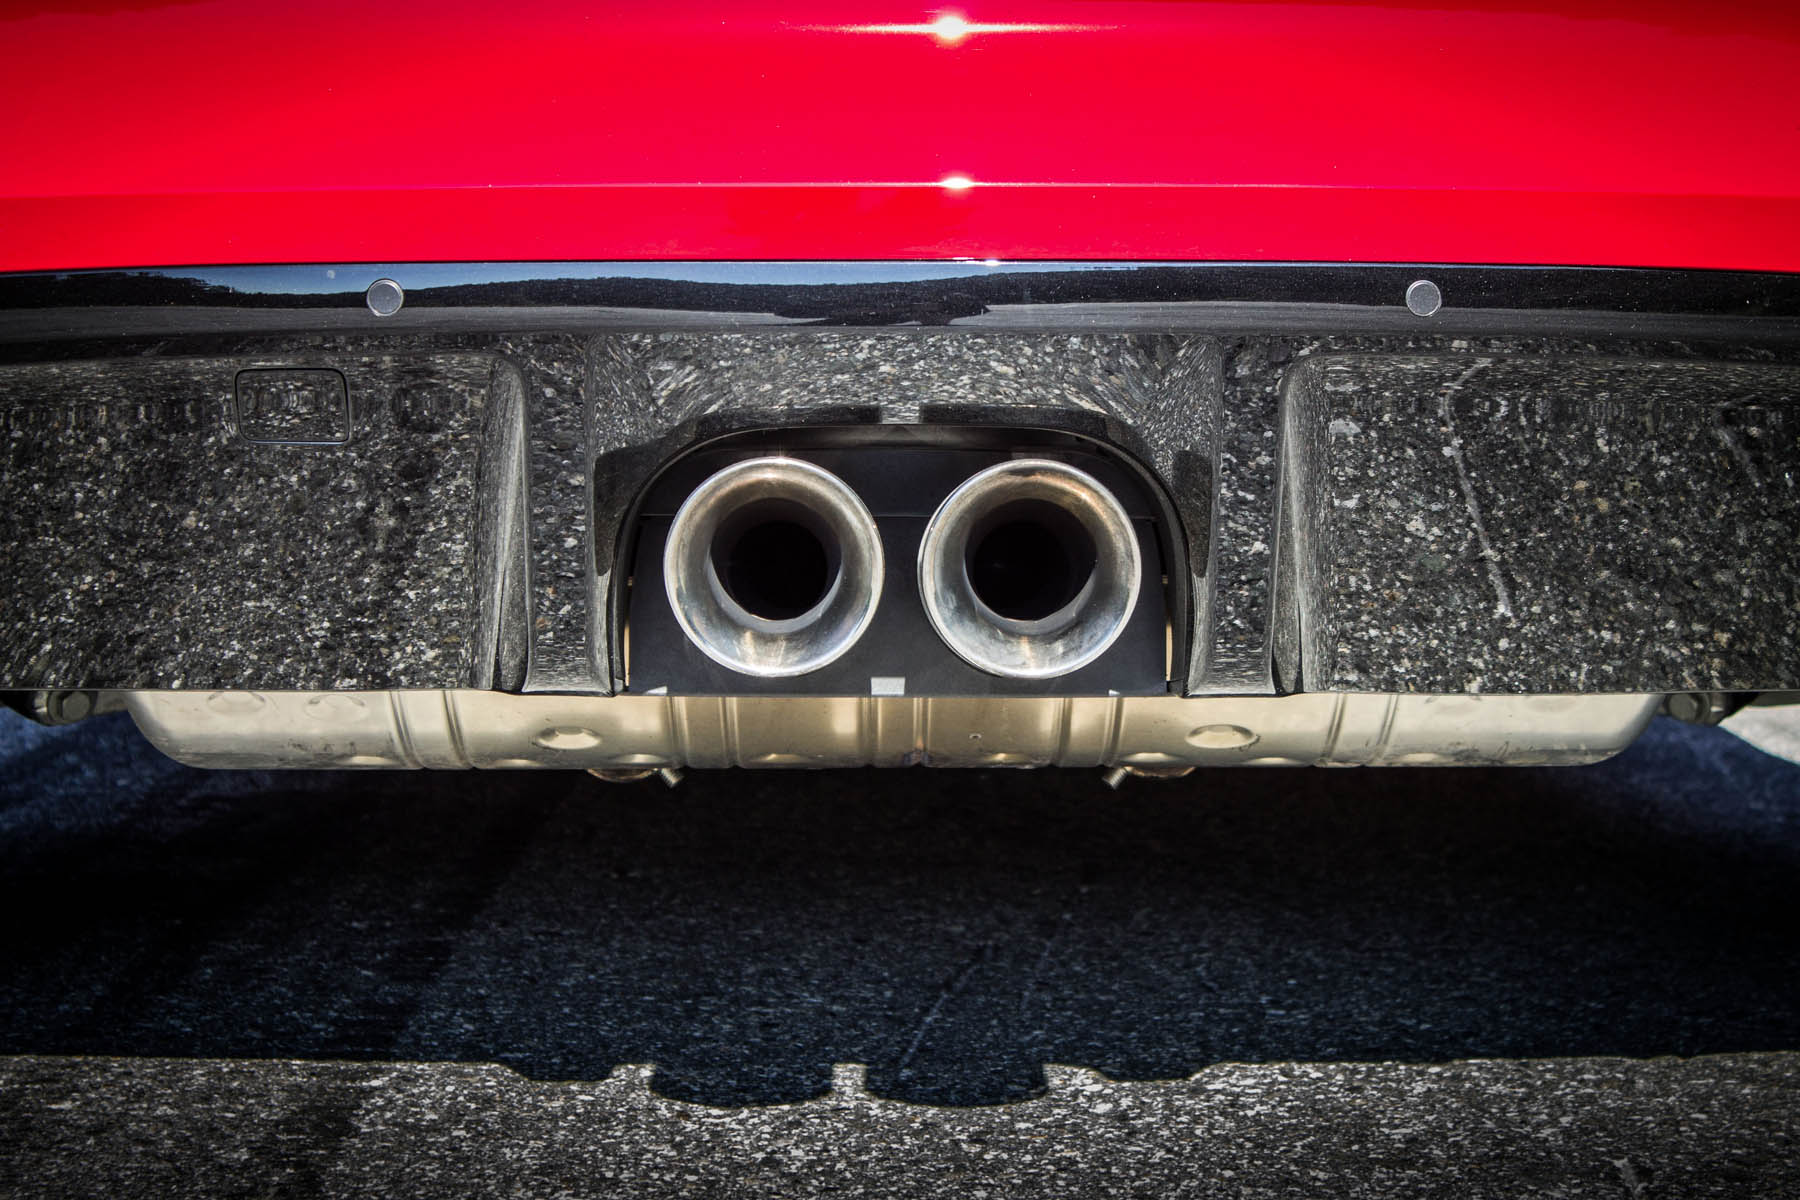 Snap! Crackle! Pop! No, not the breakfast cereal chappies – these are the explosive percussions you get out of the F-Type's massive tailpipes on startup. The sports exhaust is loud enough to annoy the neighbours, even in regular mode, but owning a Jag is all about being a bit caddish anyway. Feel free to disturb someone's slumber.